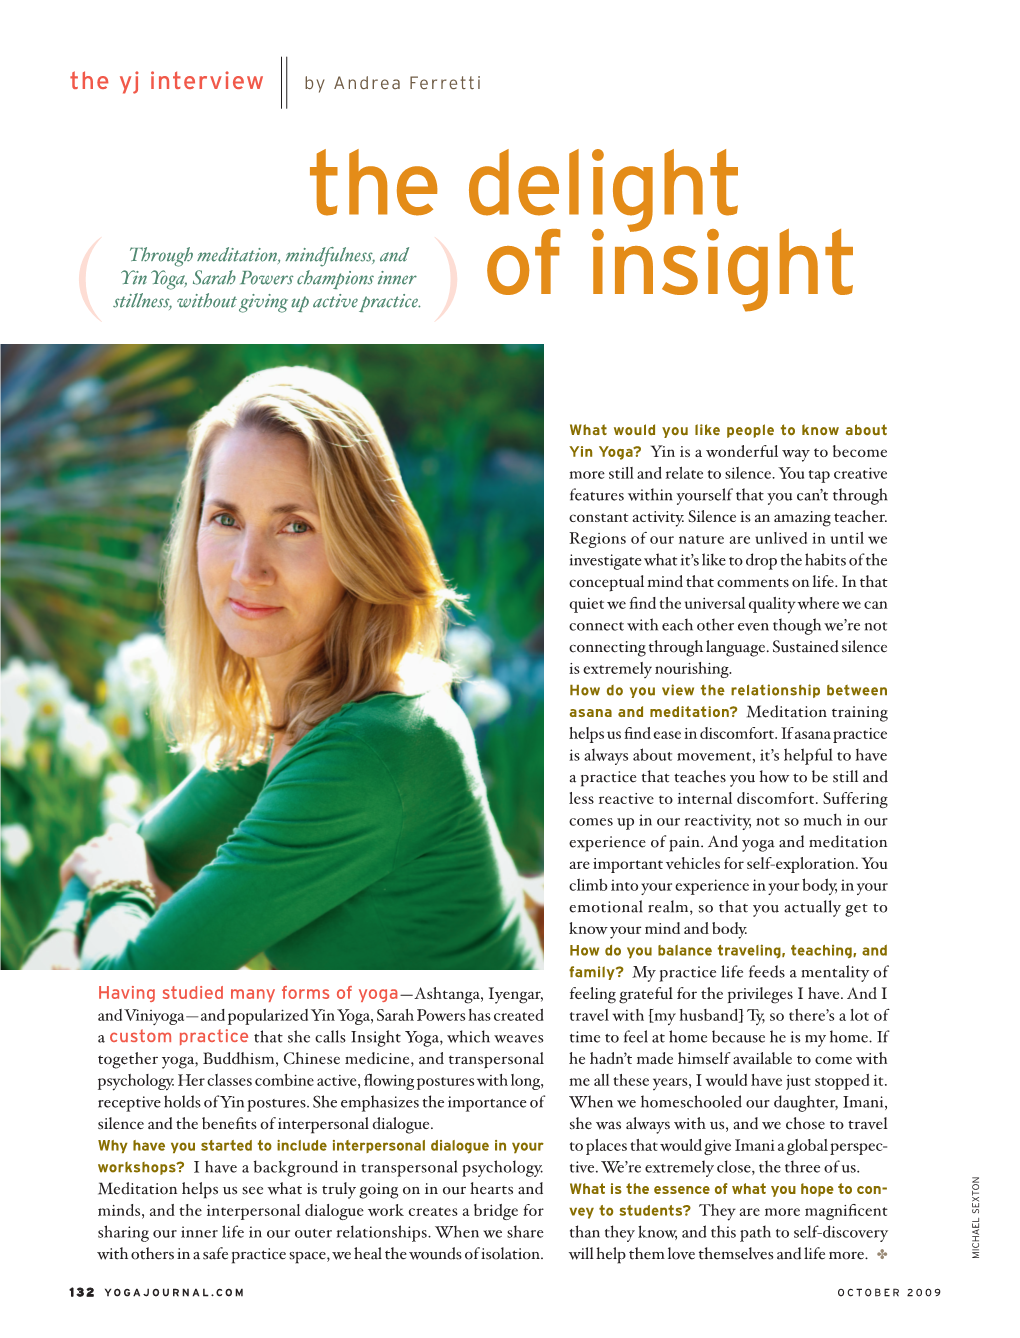 The Delight of Insight